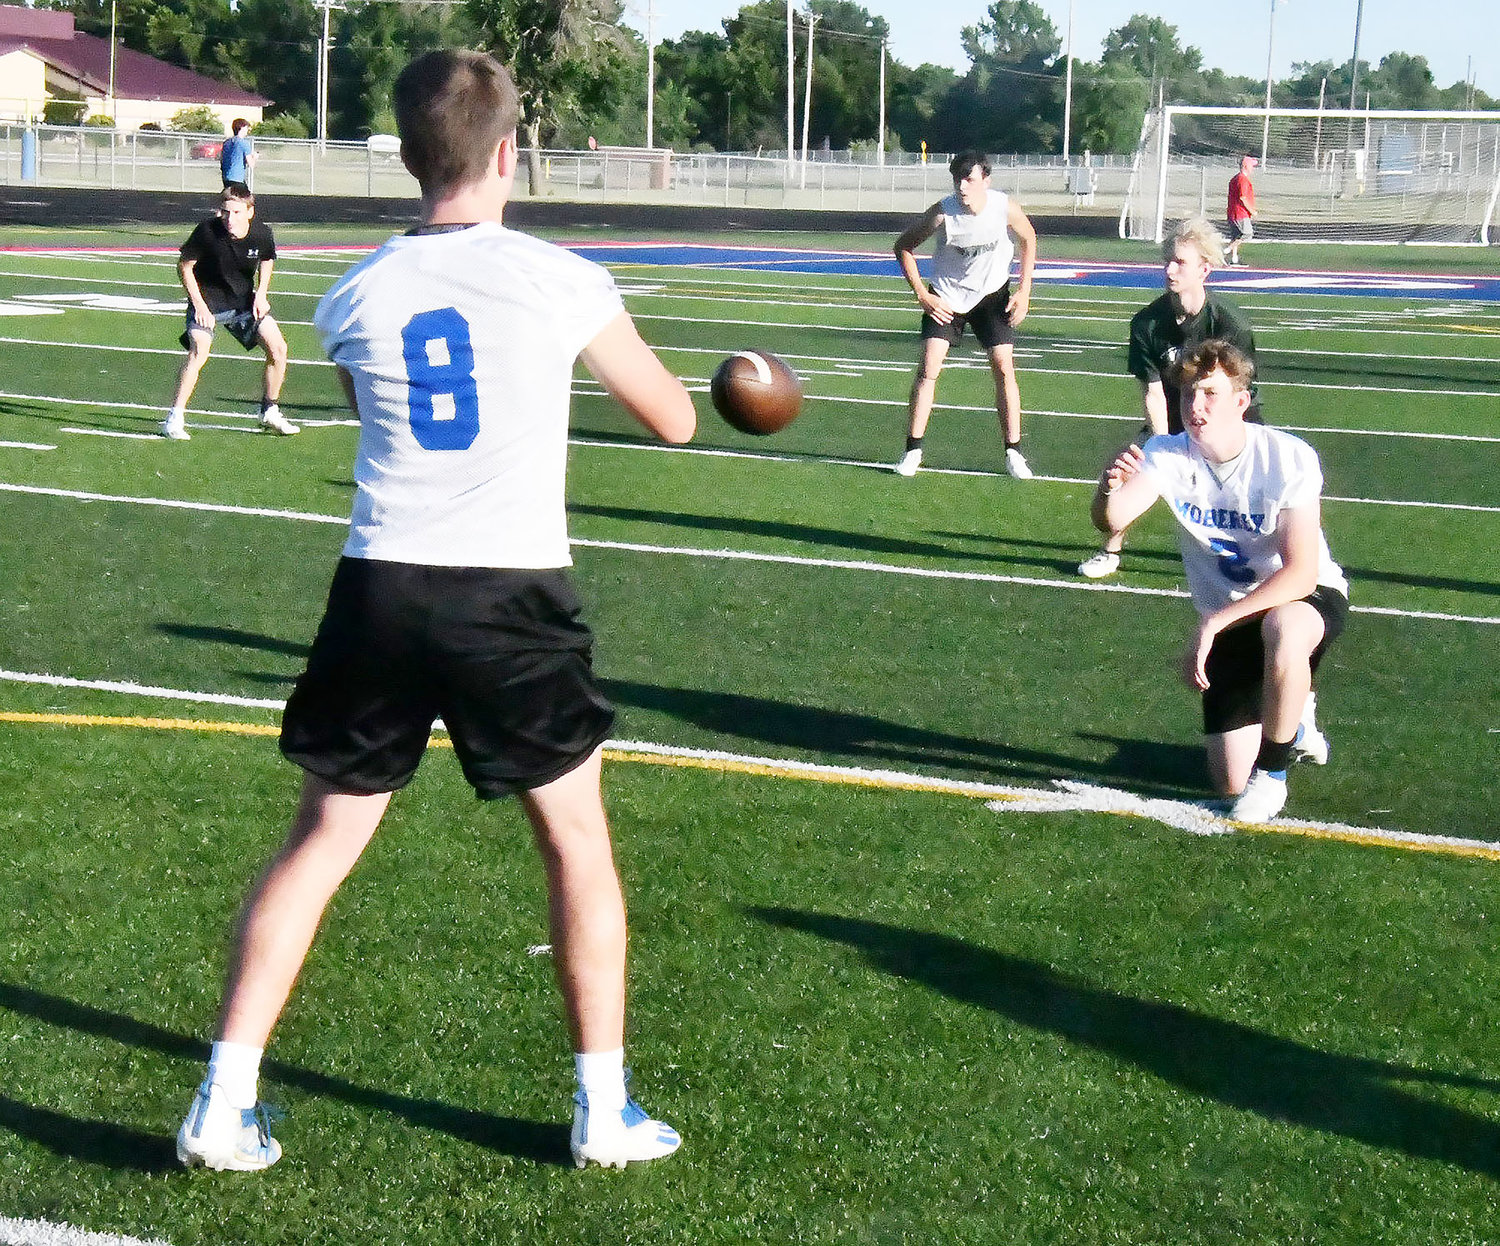 Center Jackson Engel snaps the ball to Collin Huffman to initiate a play during the 7-on-7 league on June 22.